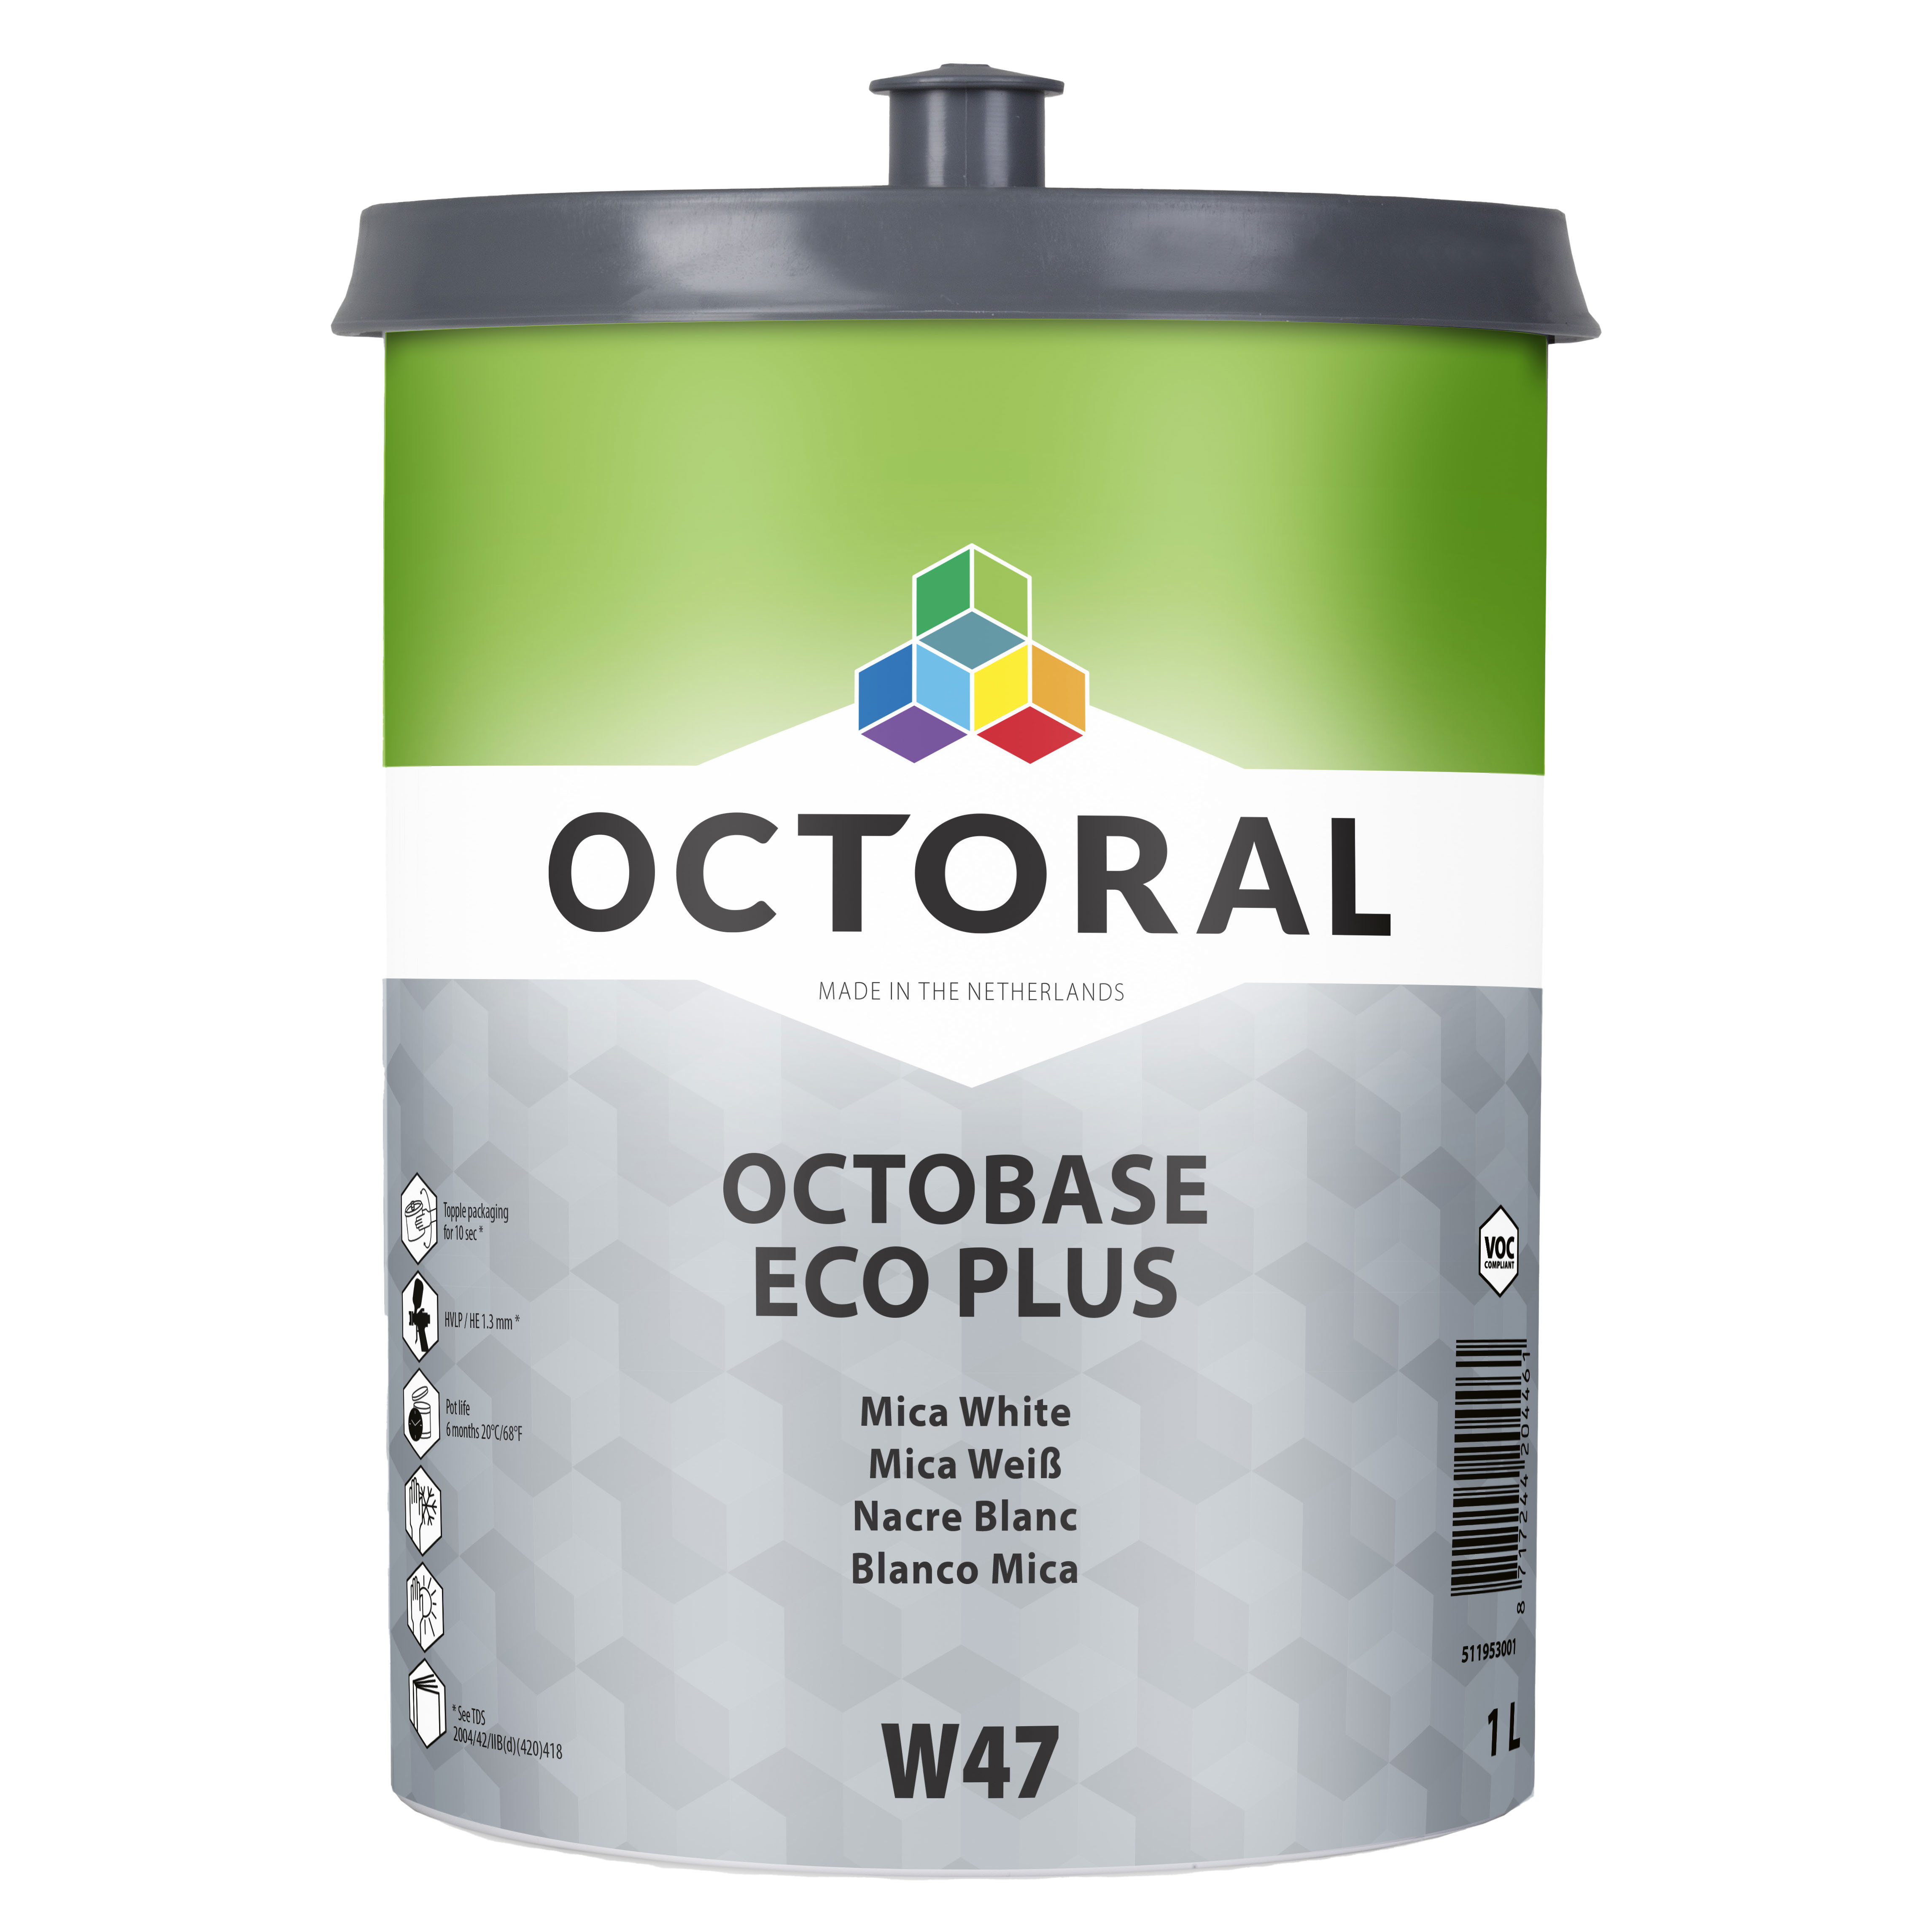 Octobase Eco Plus Mica Weiß, 1 l